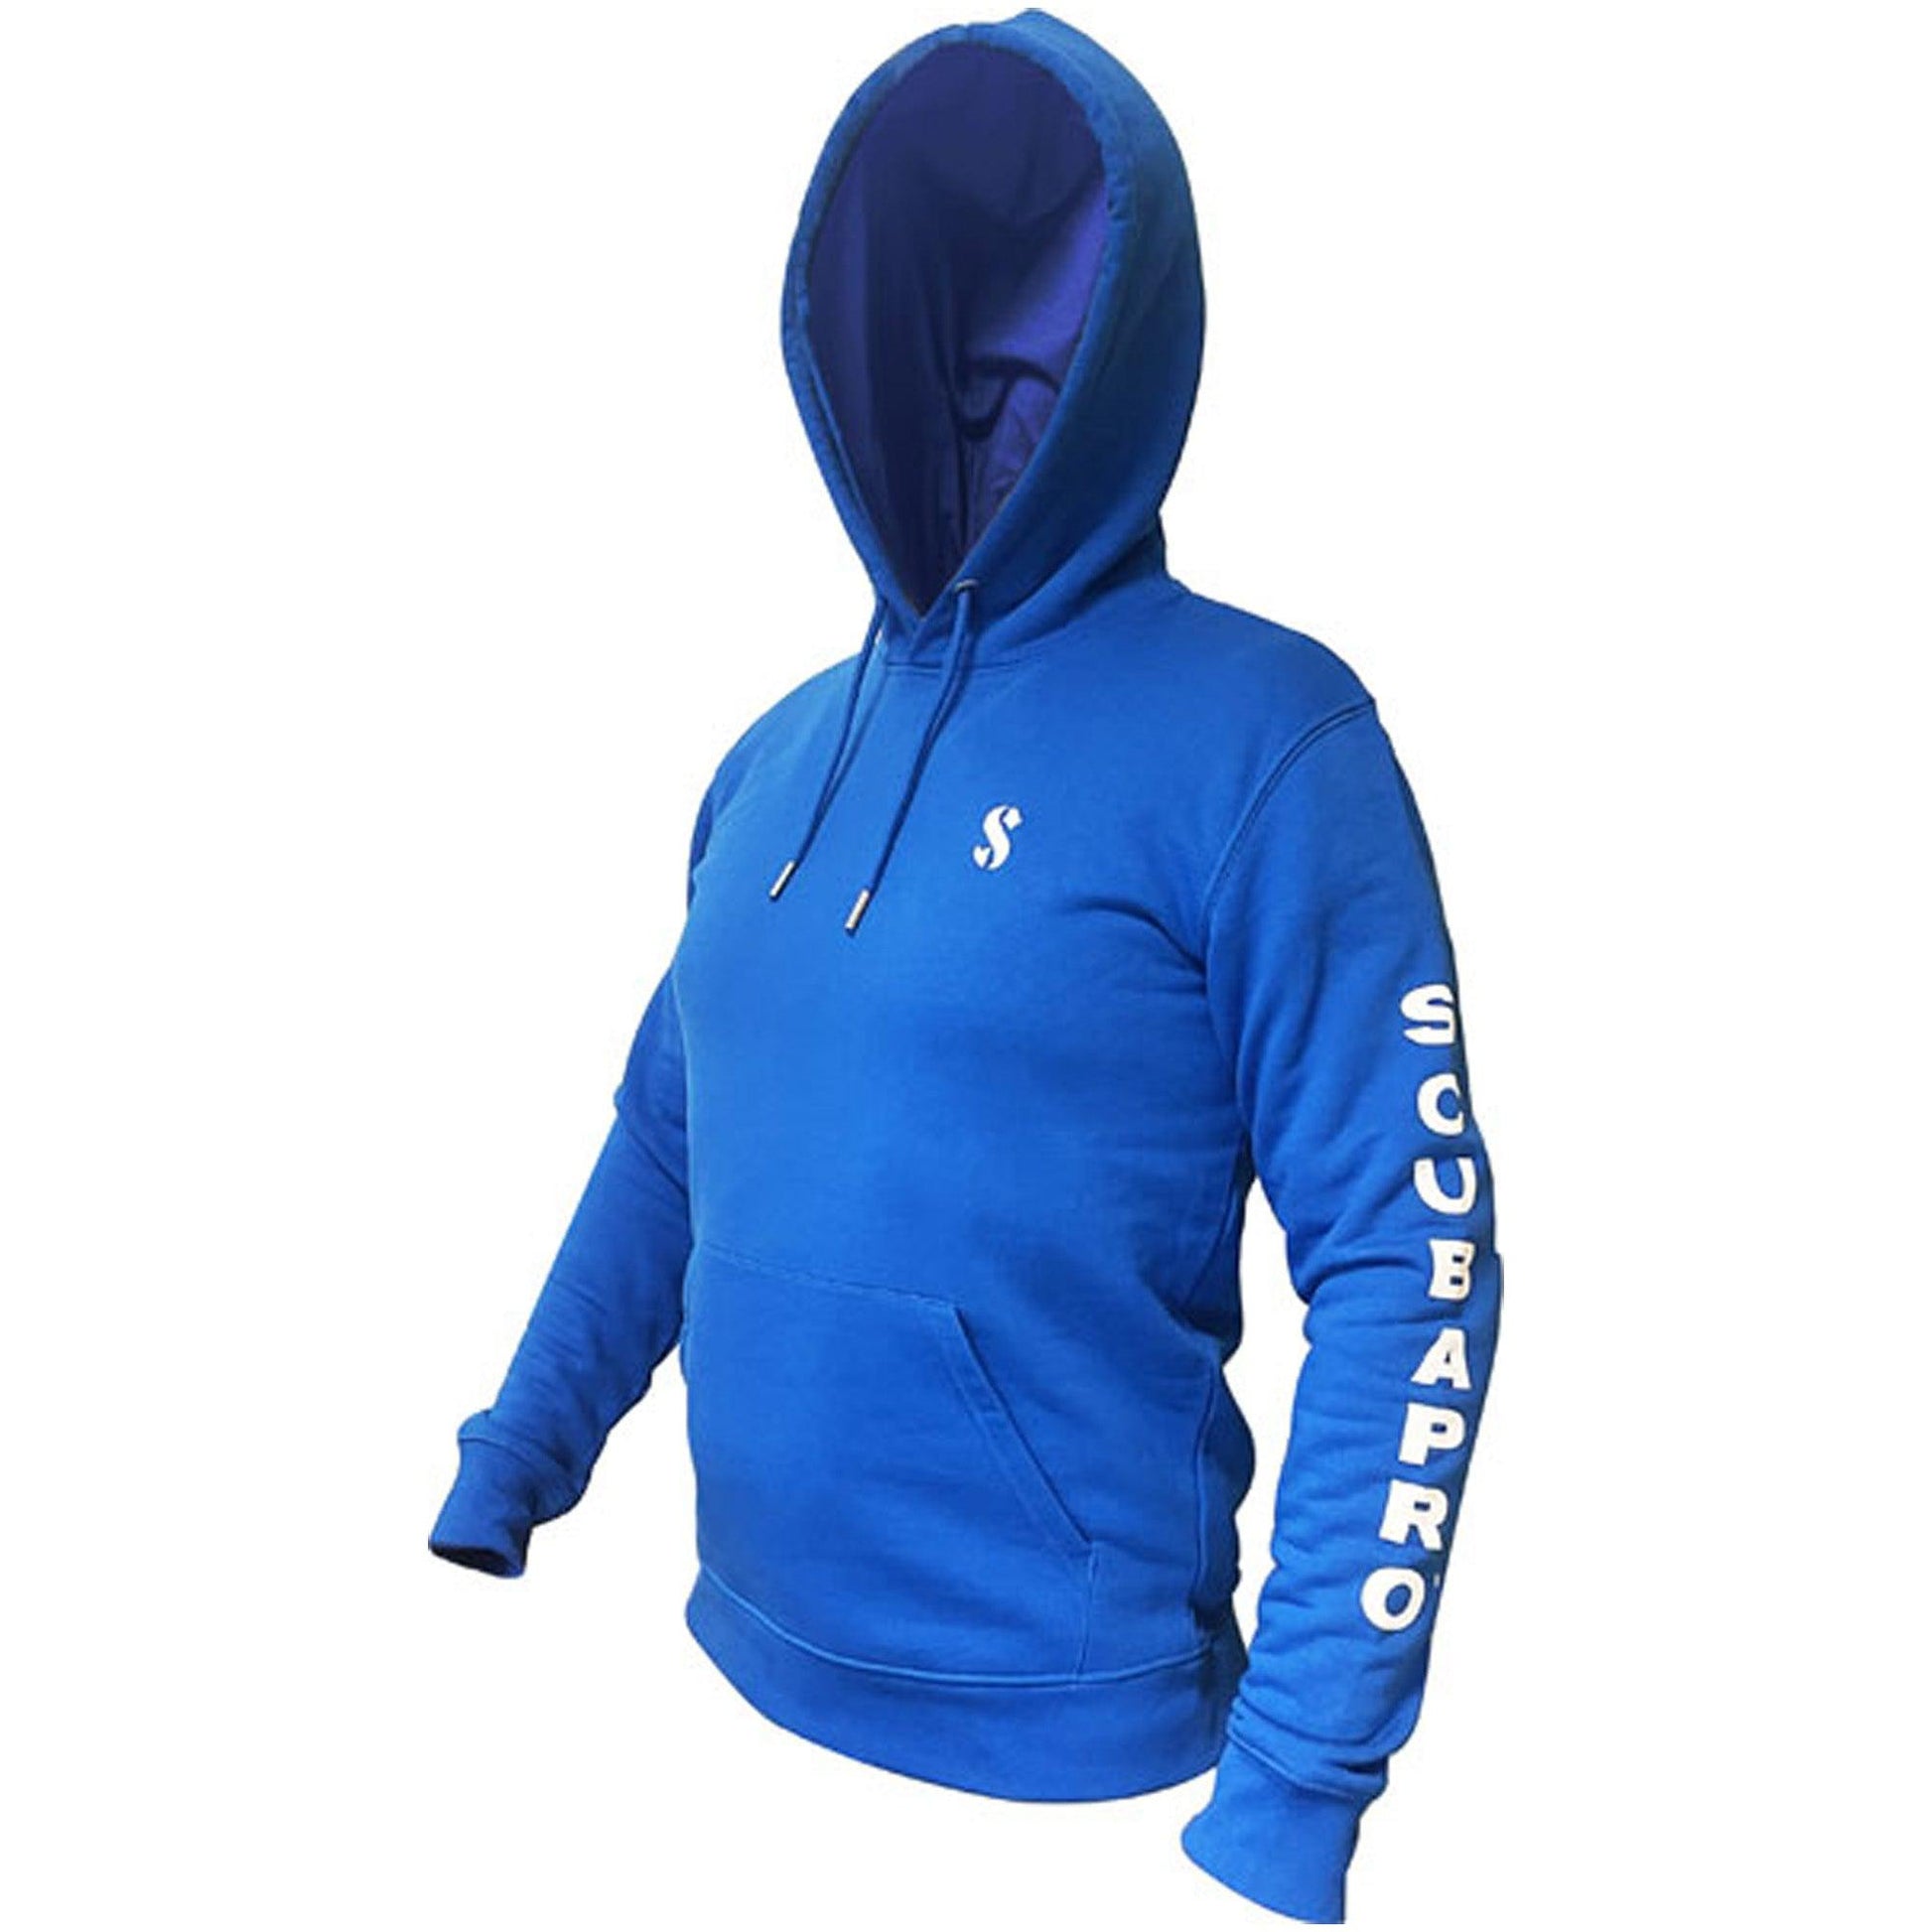 Scubapro Pullover Hoodie